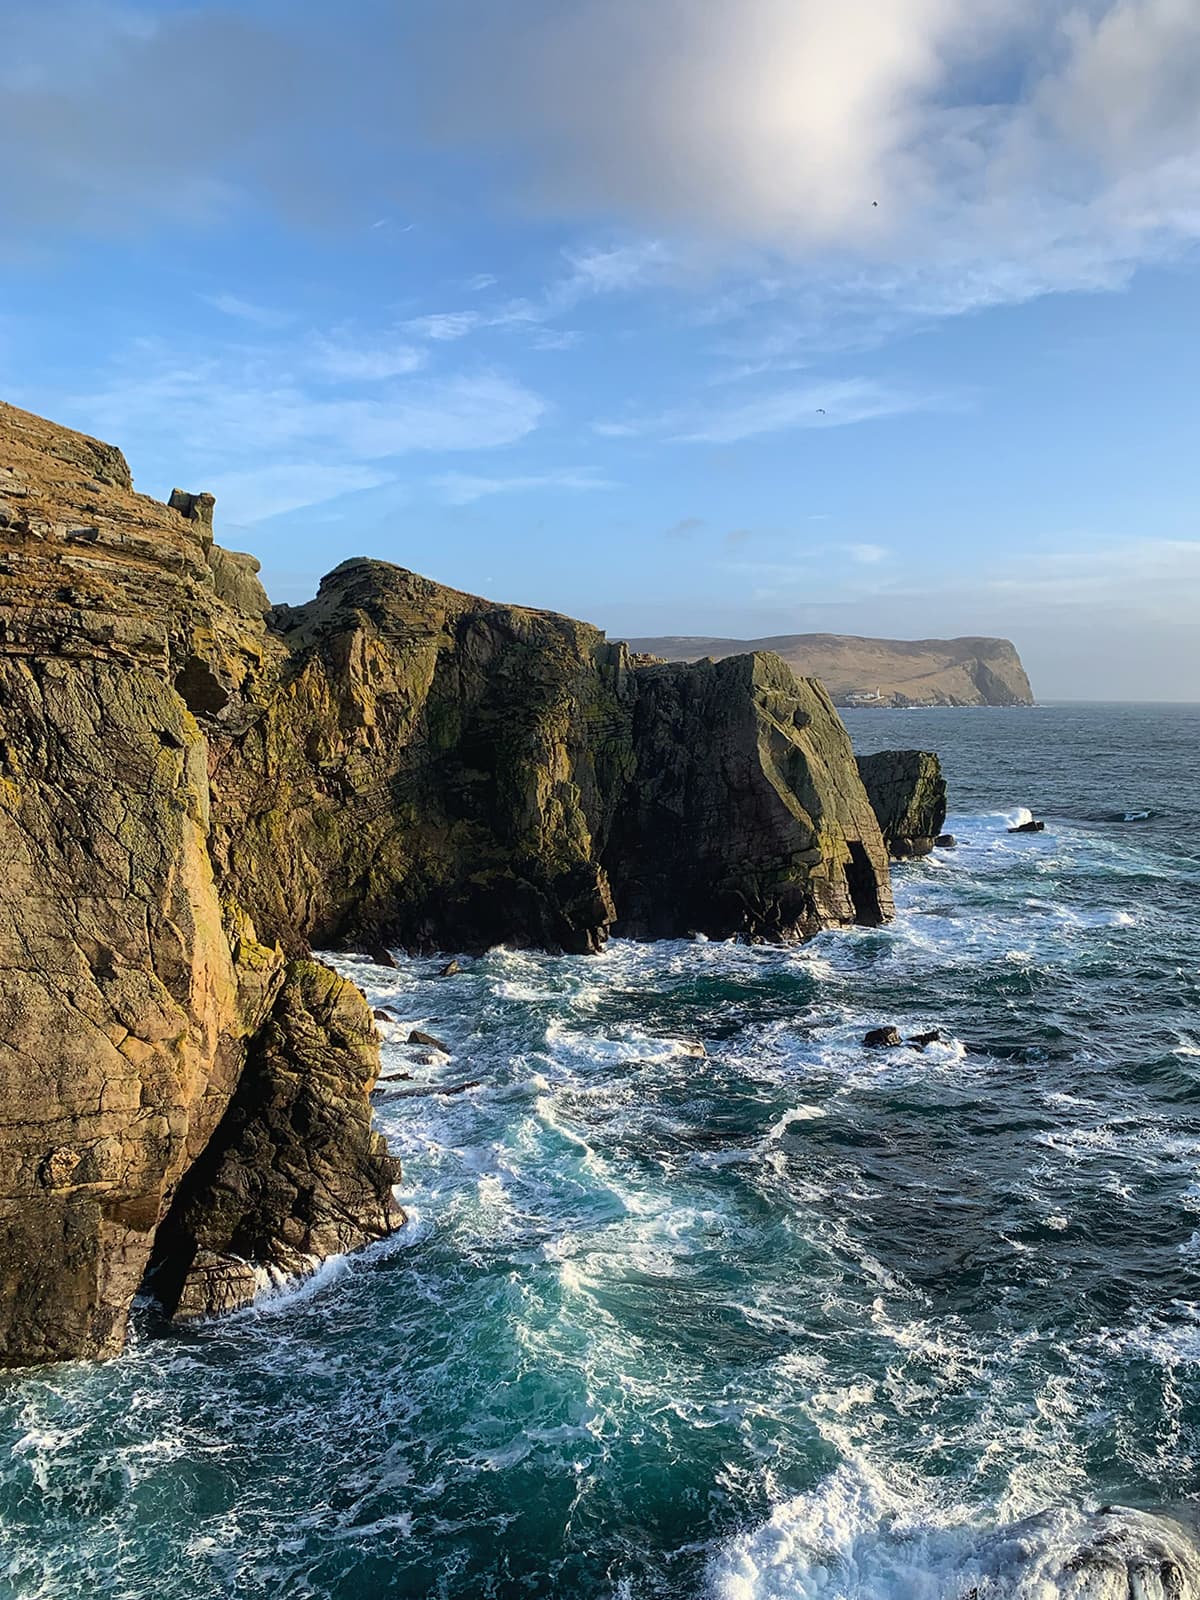 Photograph of the cliffs at the point at the Ness of Sound, Lerwick, Shetland.